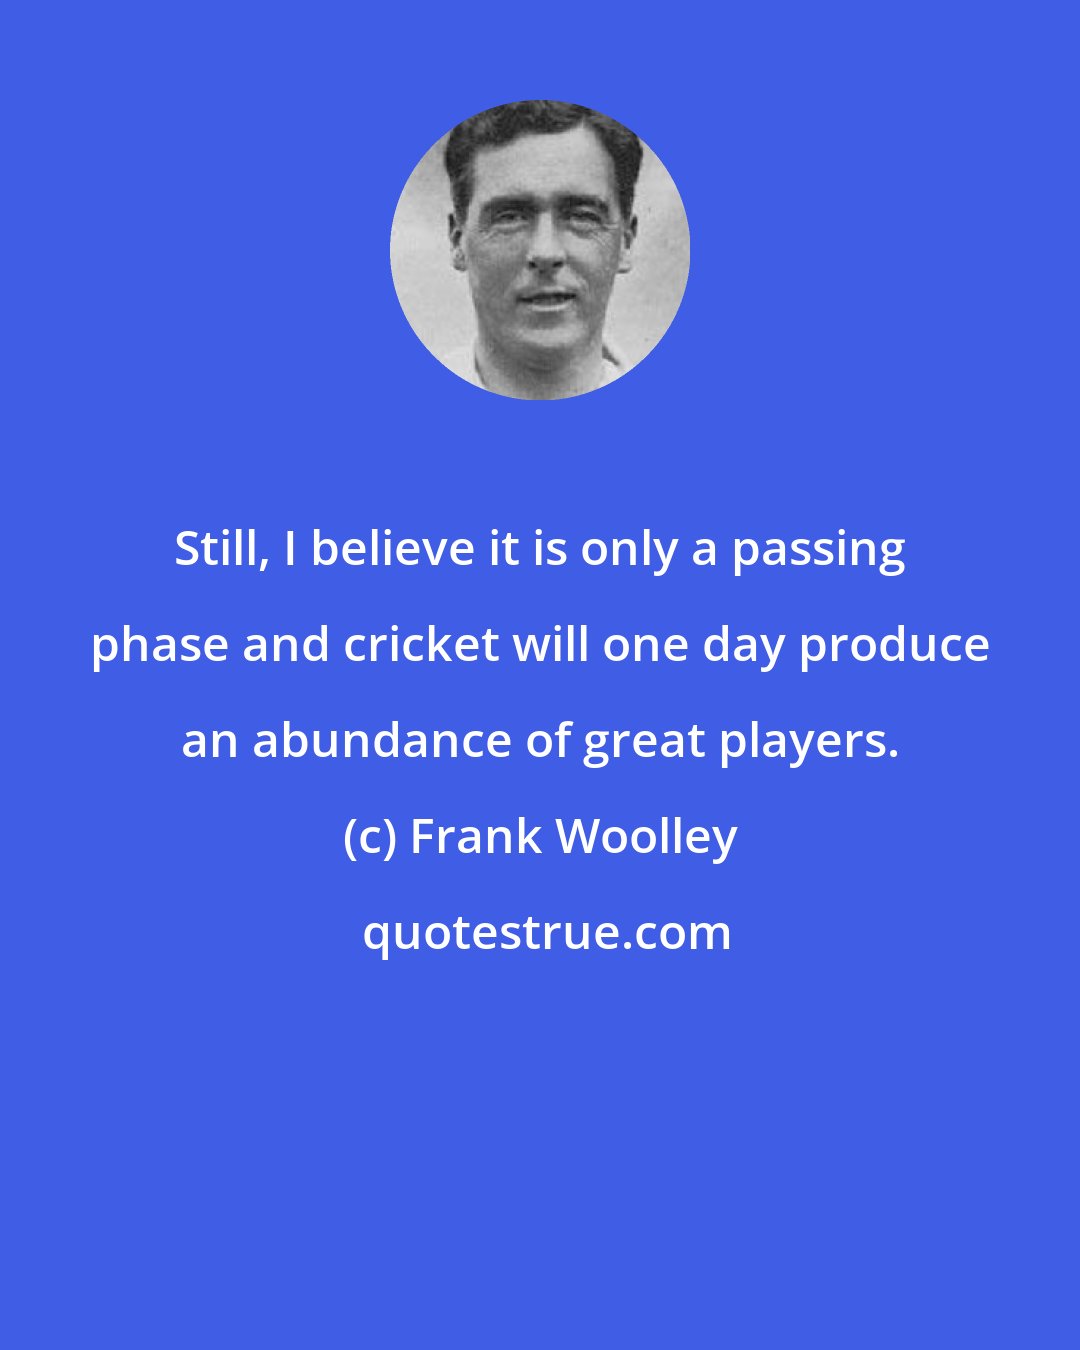 Frank Woolley: Still, I believe it is only a passing phase and cricket will one day produce an abundance of great players.